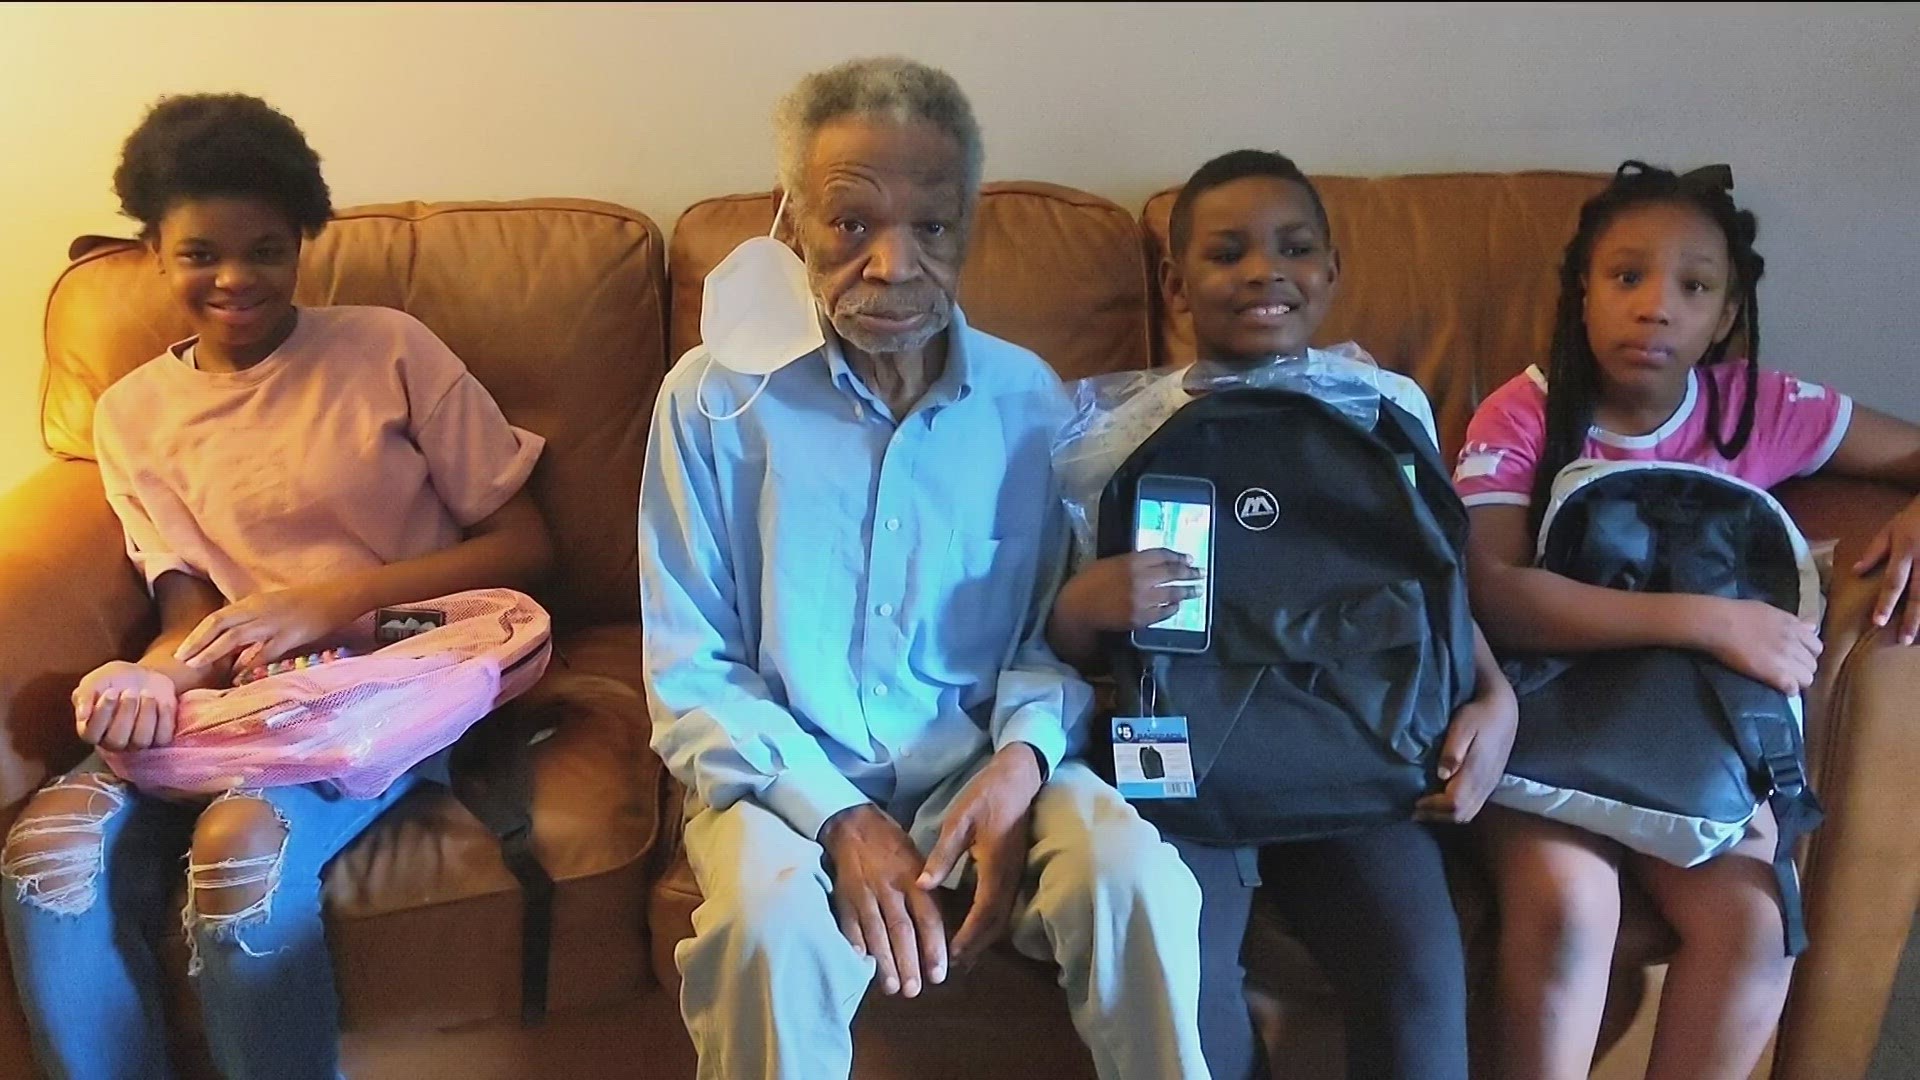 Project GRANDD is helping grandparents who are keeping their grandchildren out of the foster system.